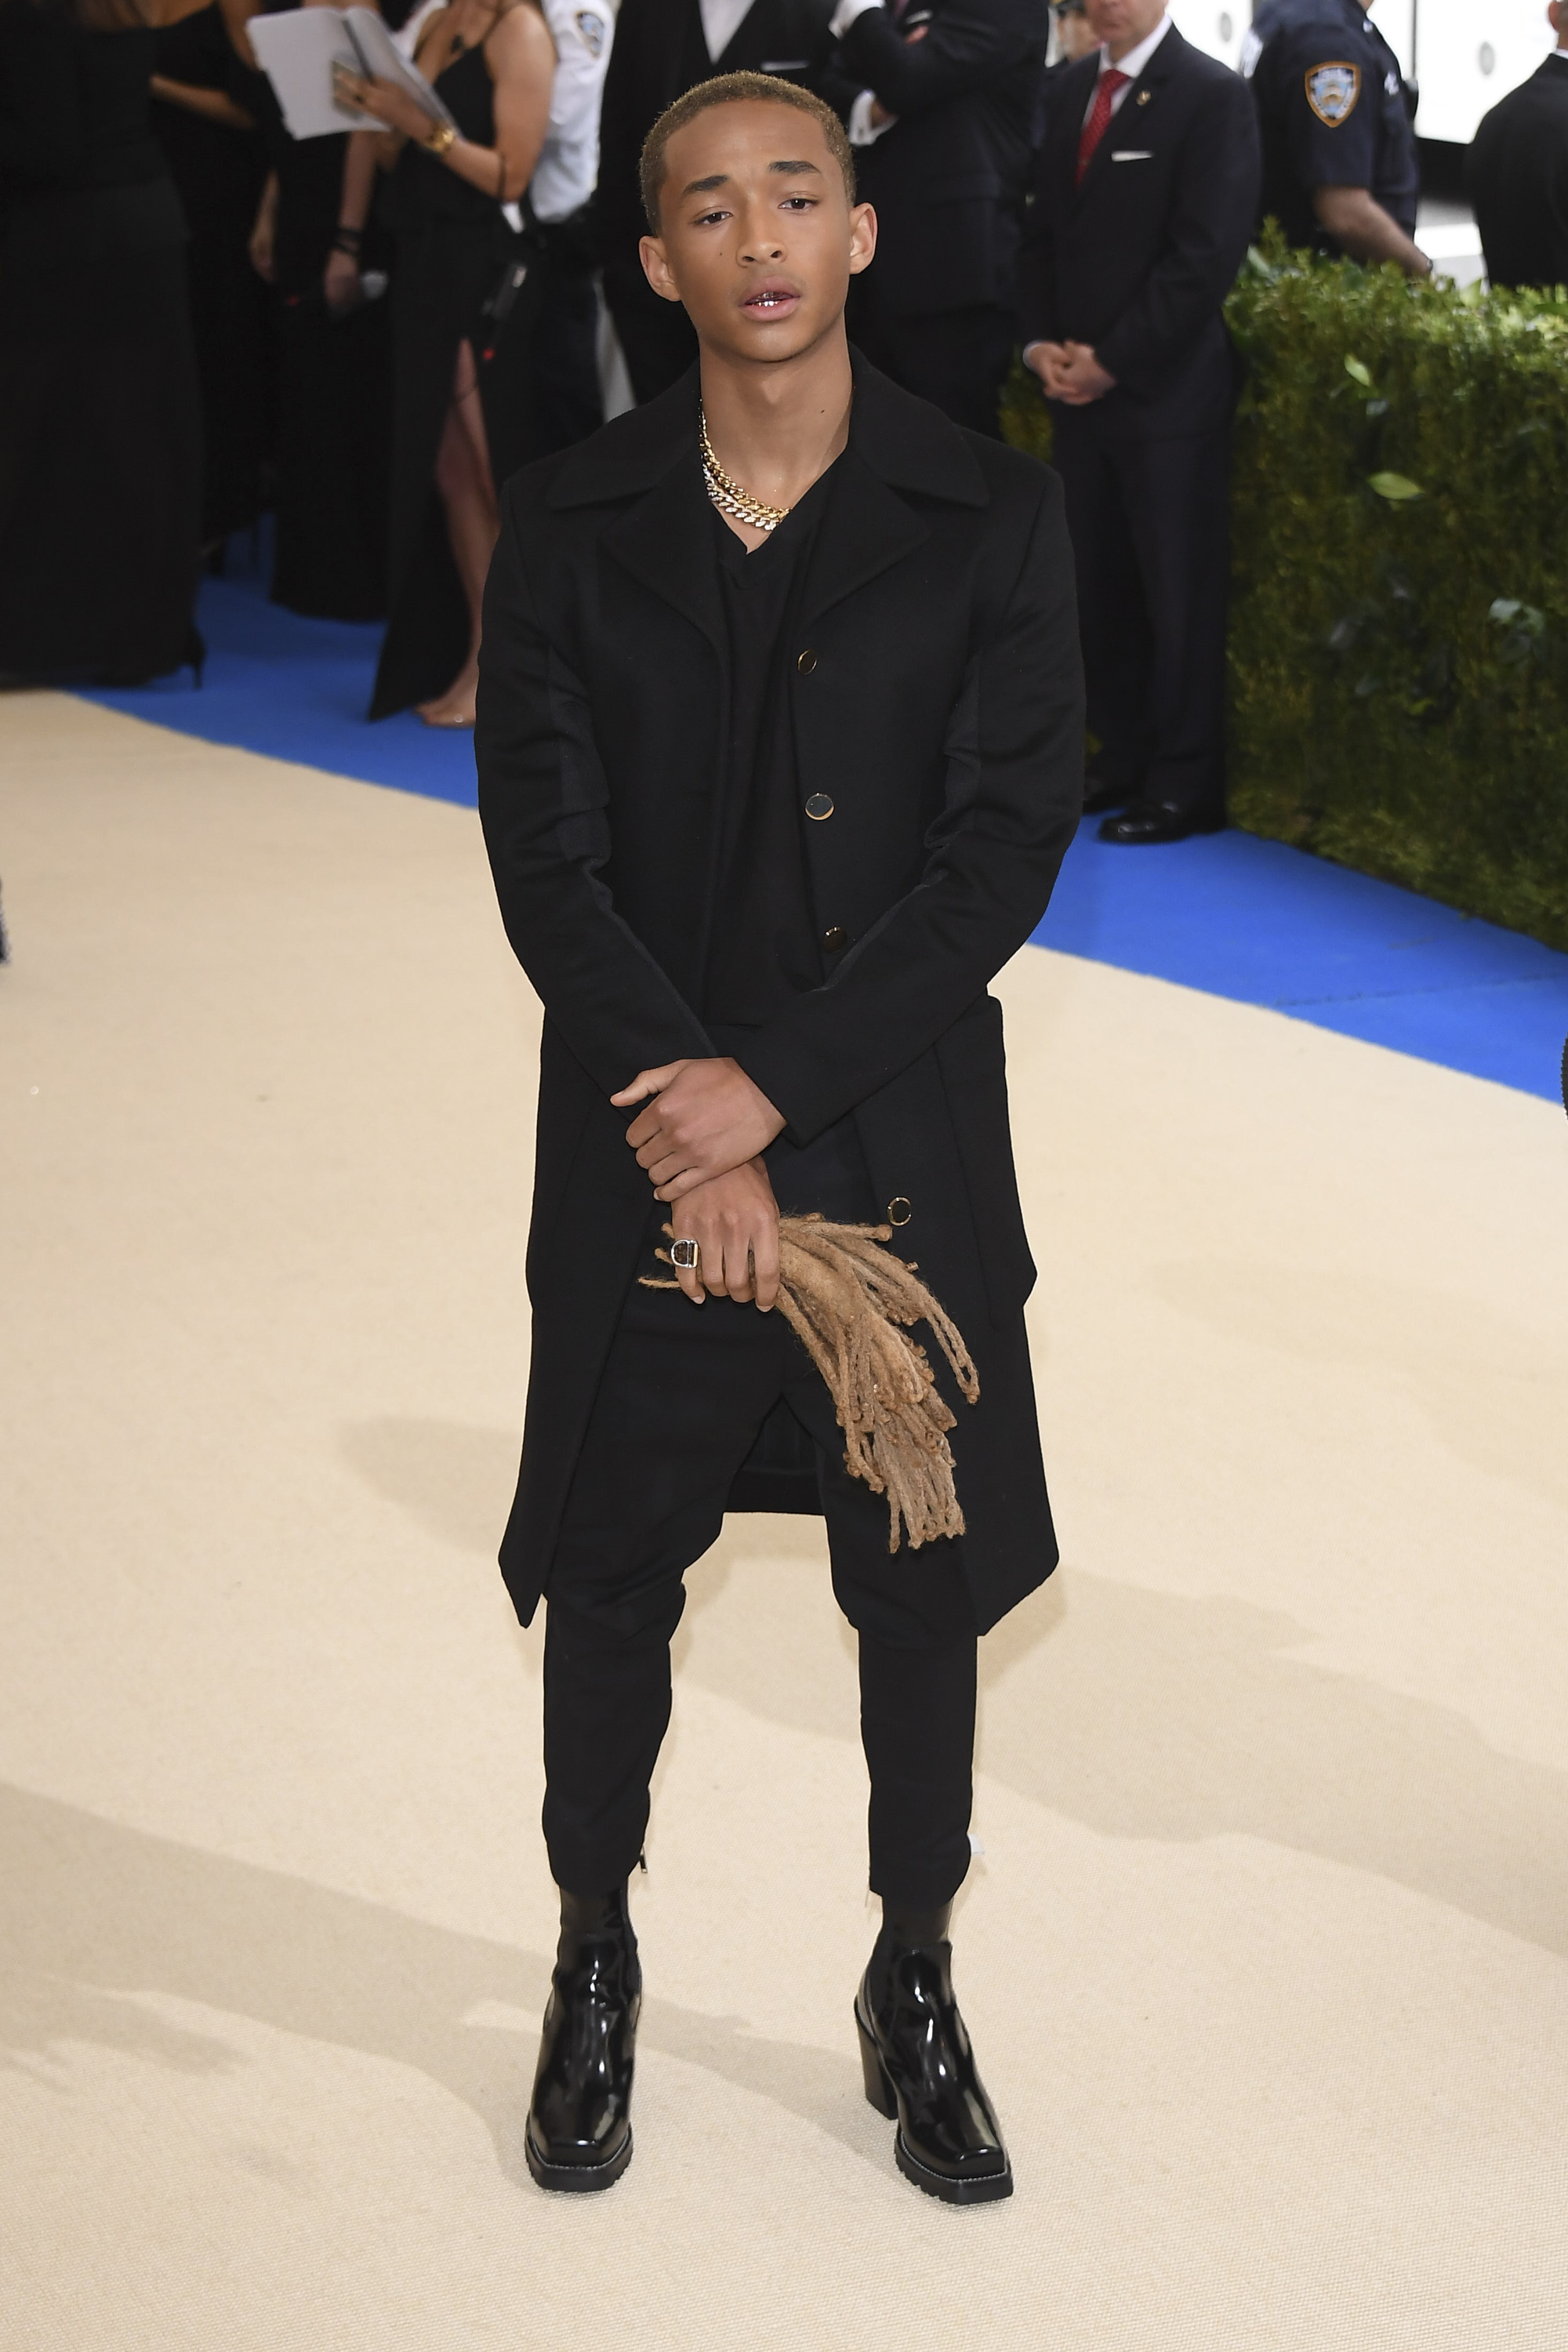 Jaden Smith shows off new buzzcut hairdo at the Met Gala 2017 - and takes  his old dreadlocks as his date